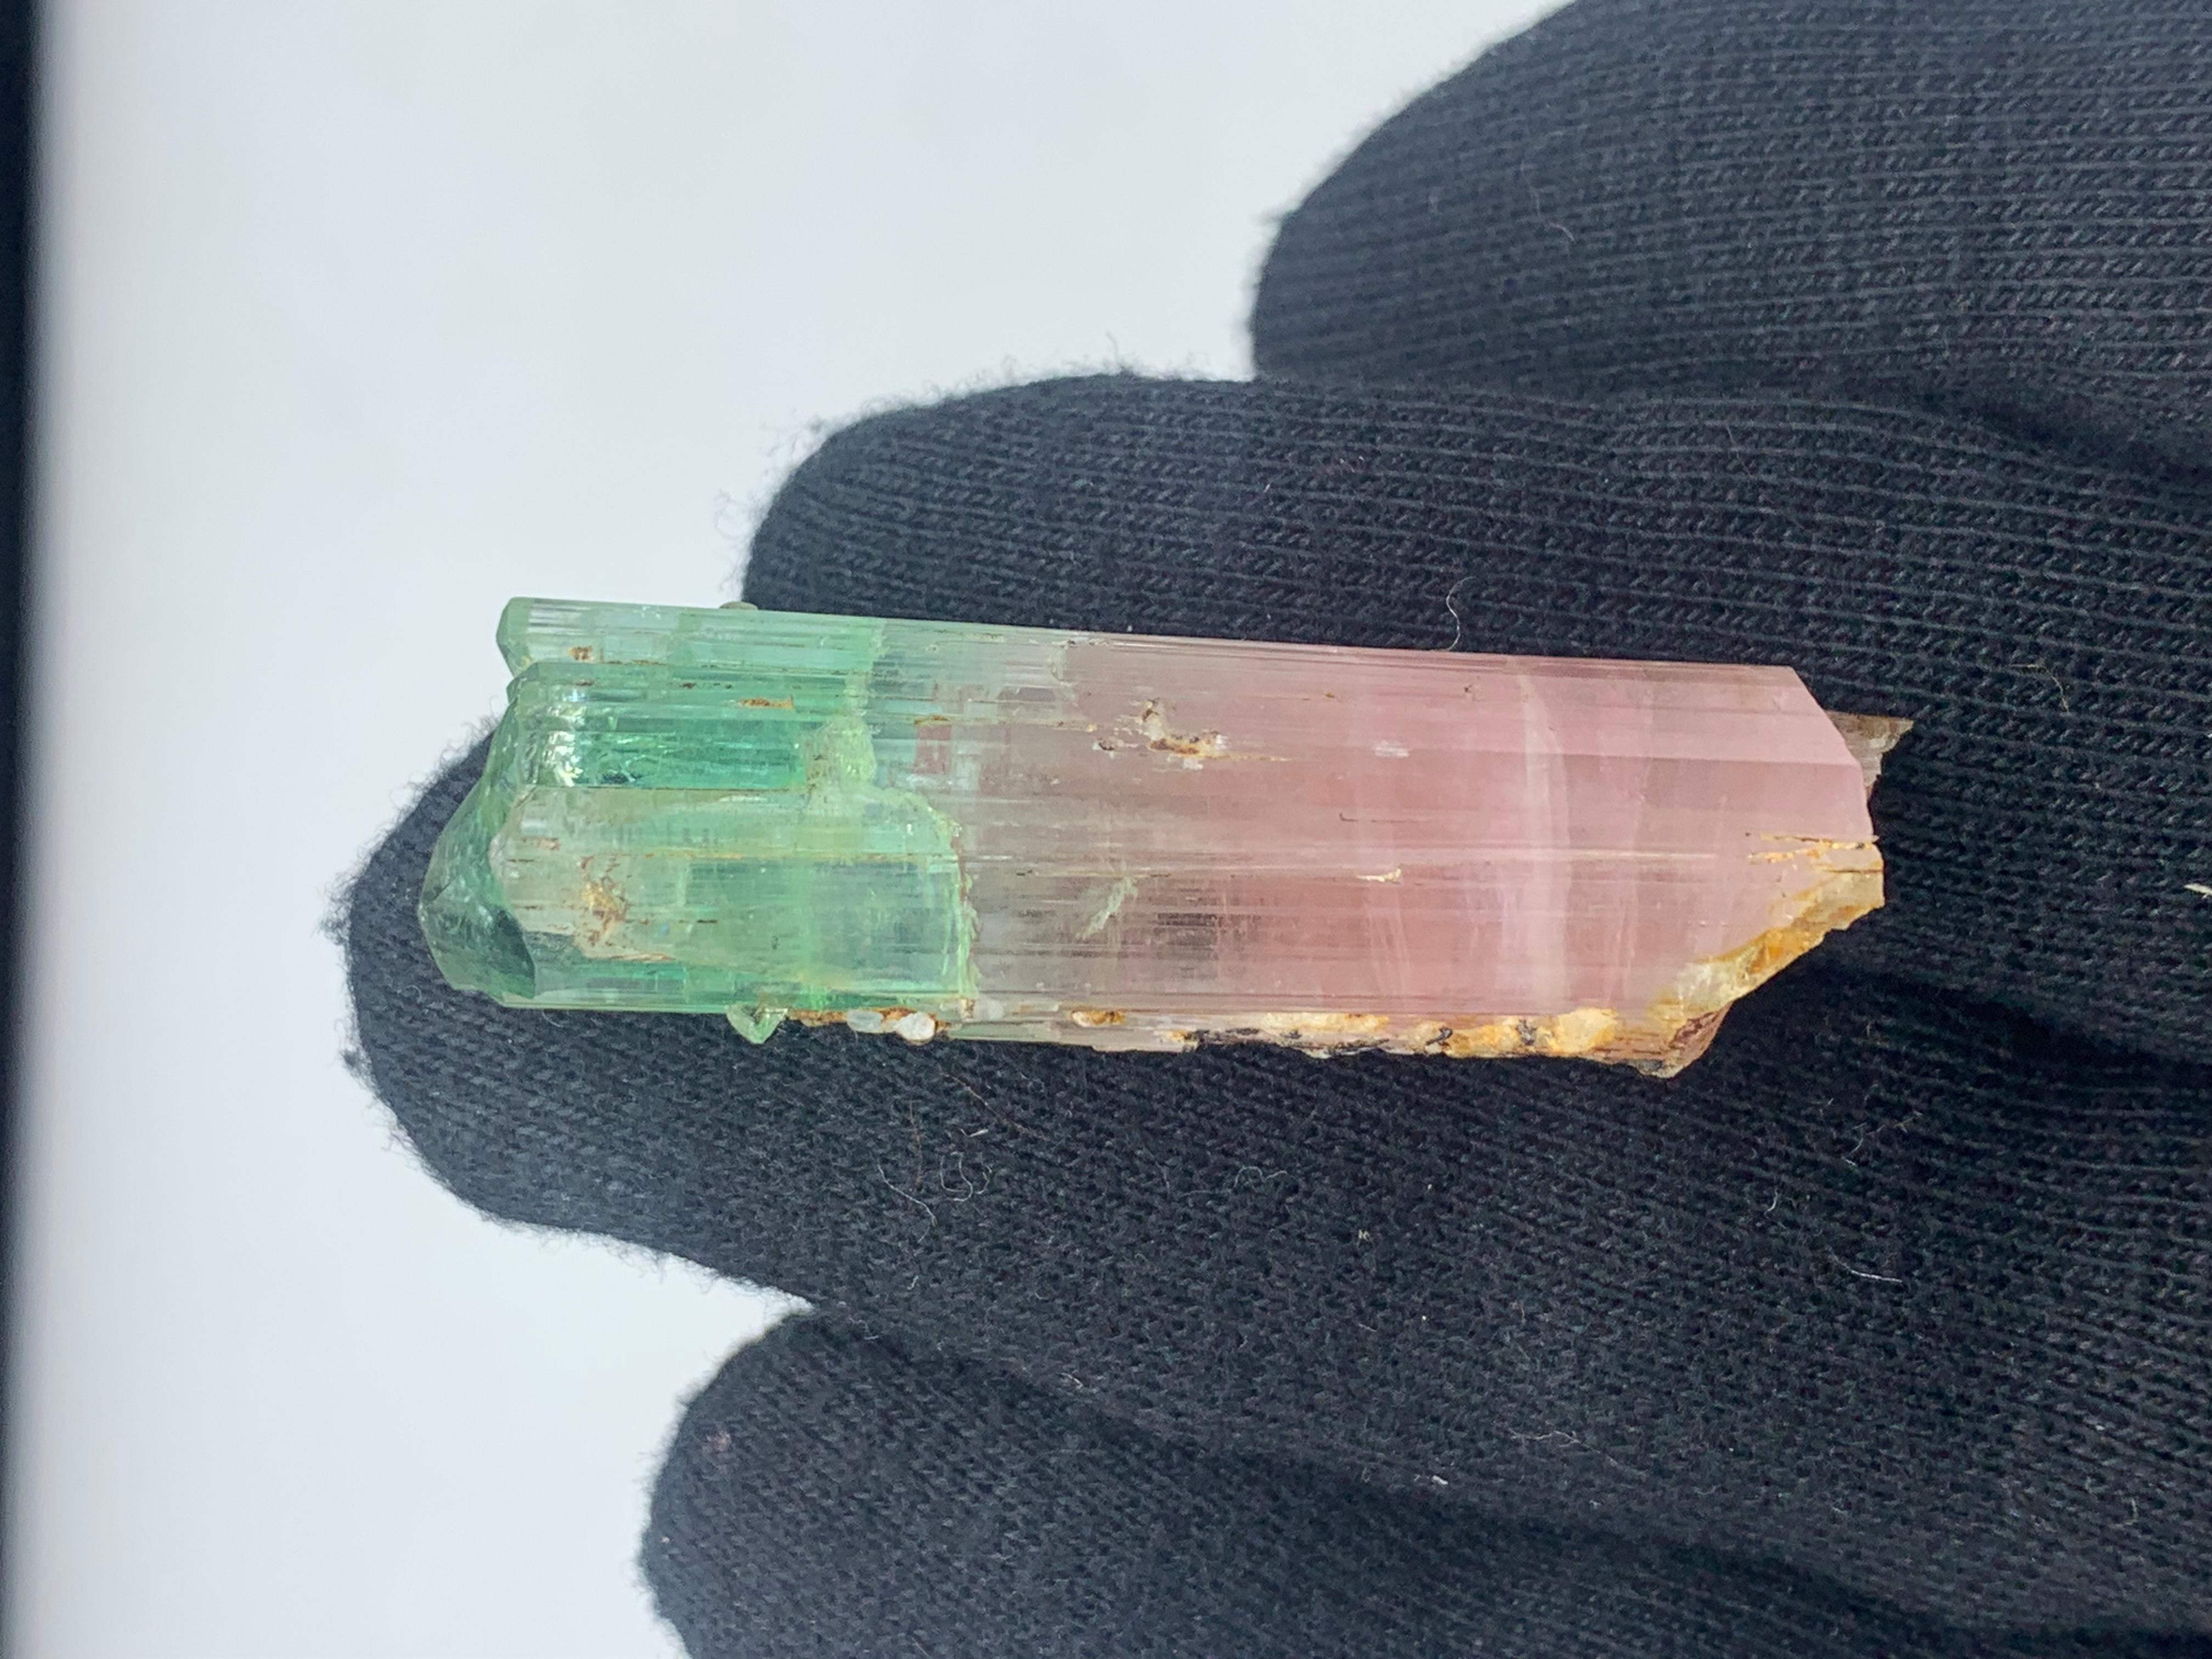 Weight: 22.17 Gram
Dimension: 5.5 x 1.4 x 1.4 Cm
Origin: Kunar, Afghanistan
Colour: Pink and Green

Tourmaline is a crystalline silicate mineral group in which boron is compounded with elements such as aluminium, iron, magnesium, sodium, lithium, or